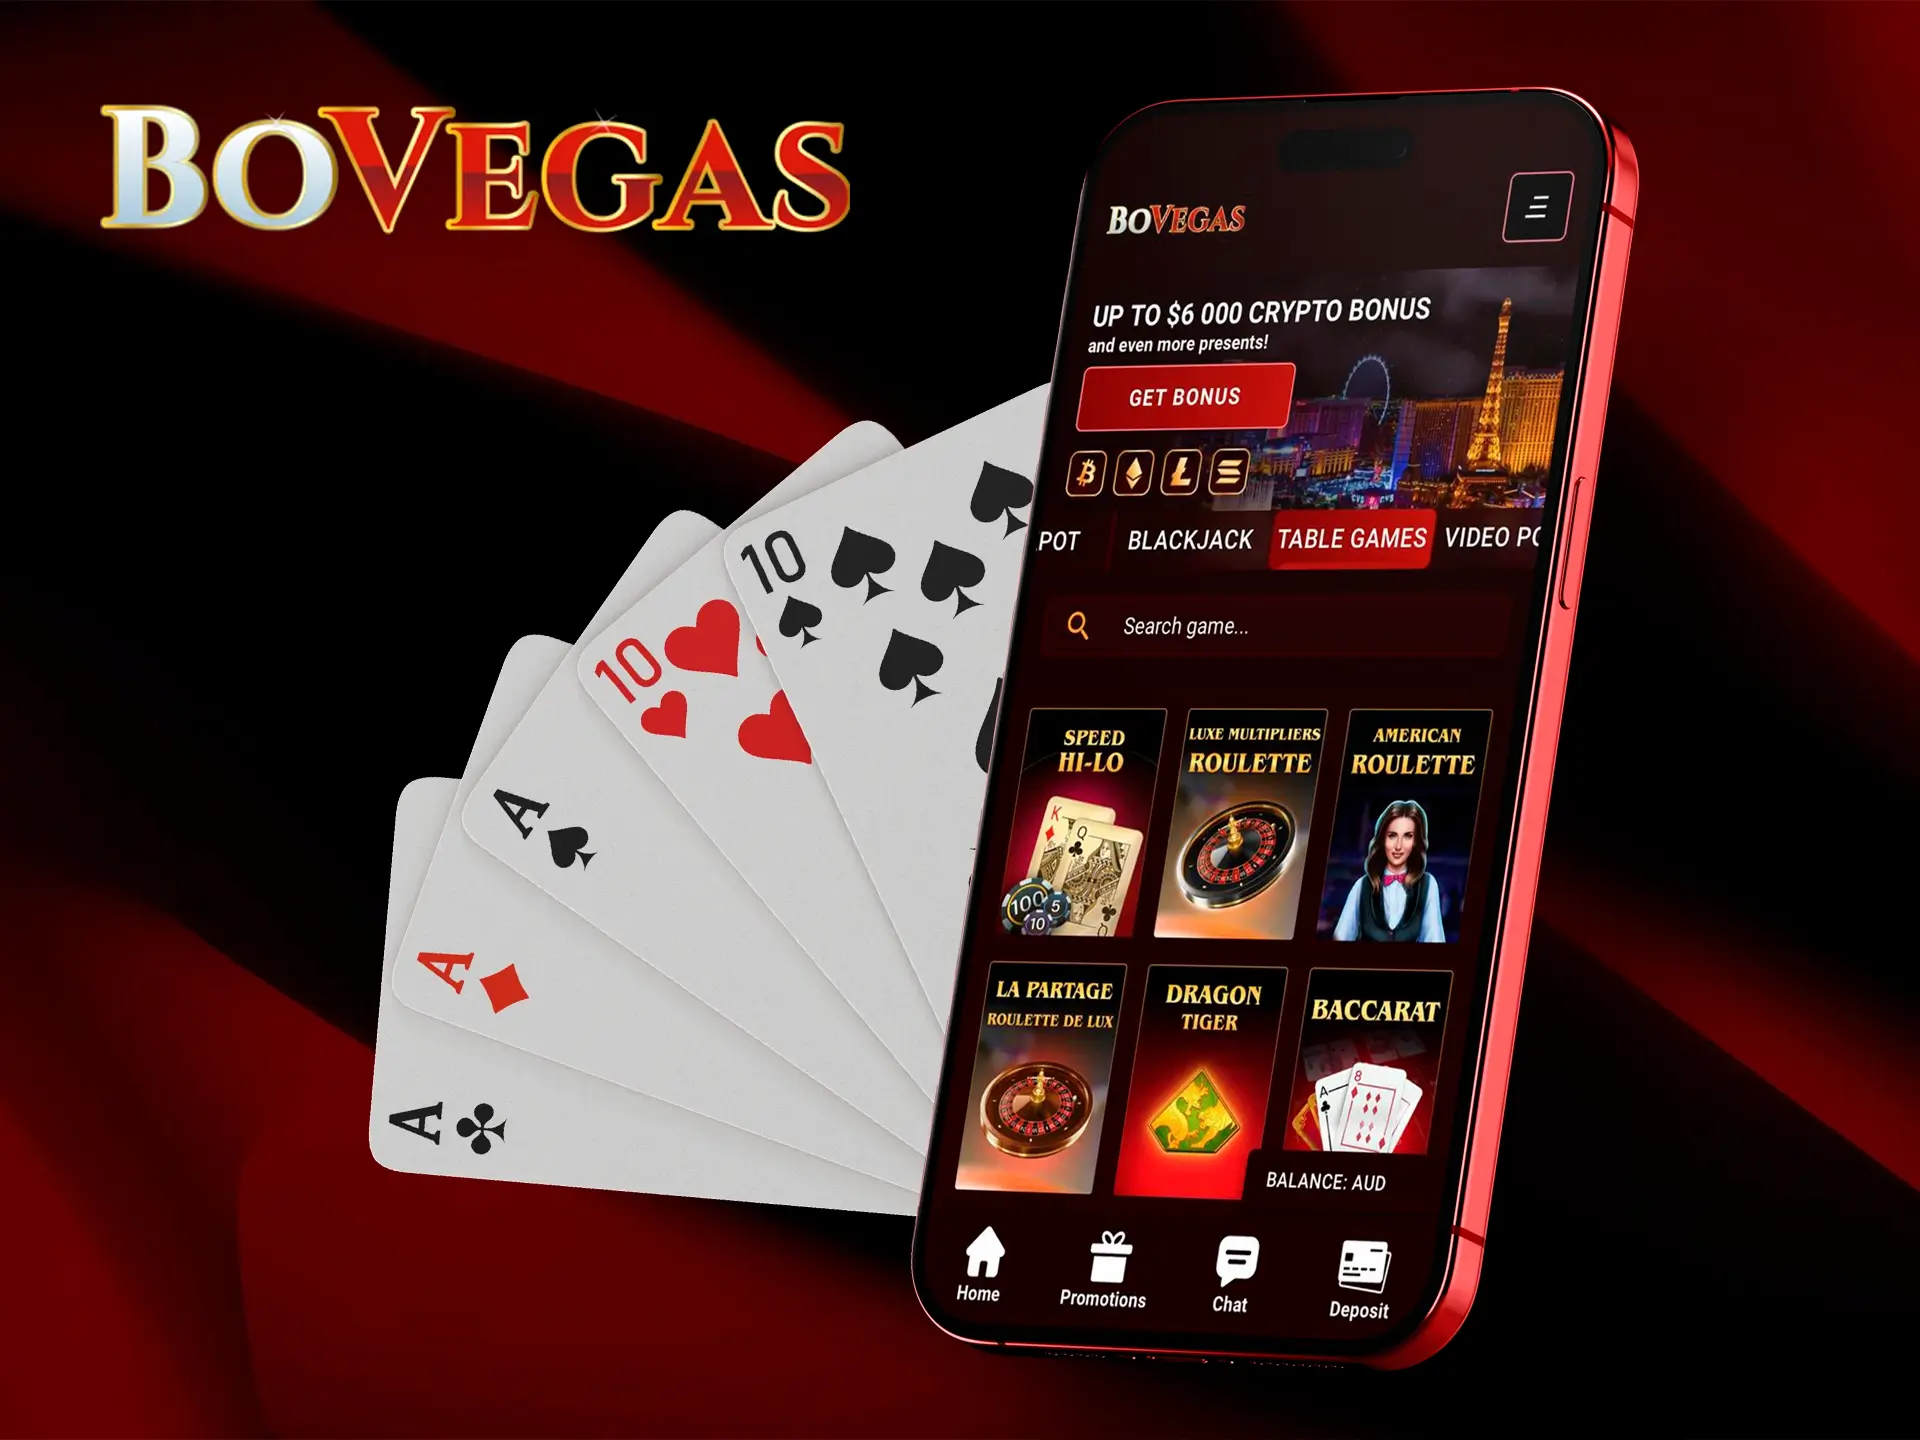 The BoVegas app gives you instant full access to your favourite casino table games.